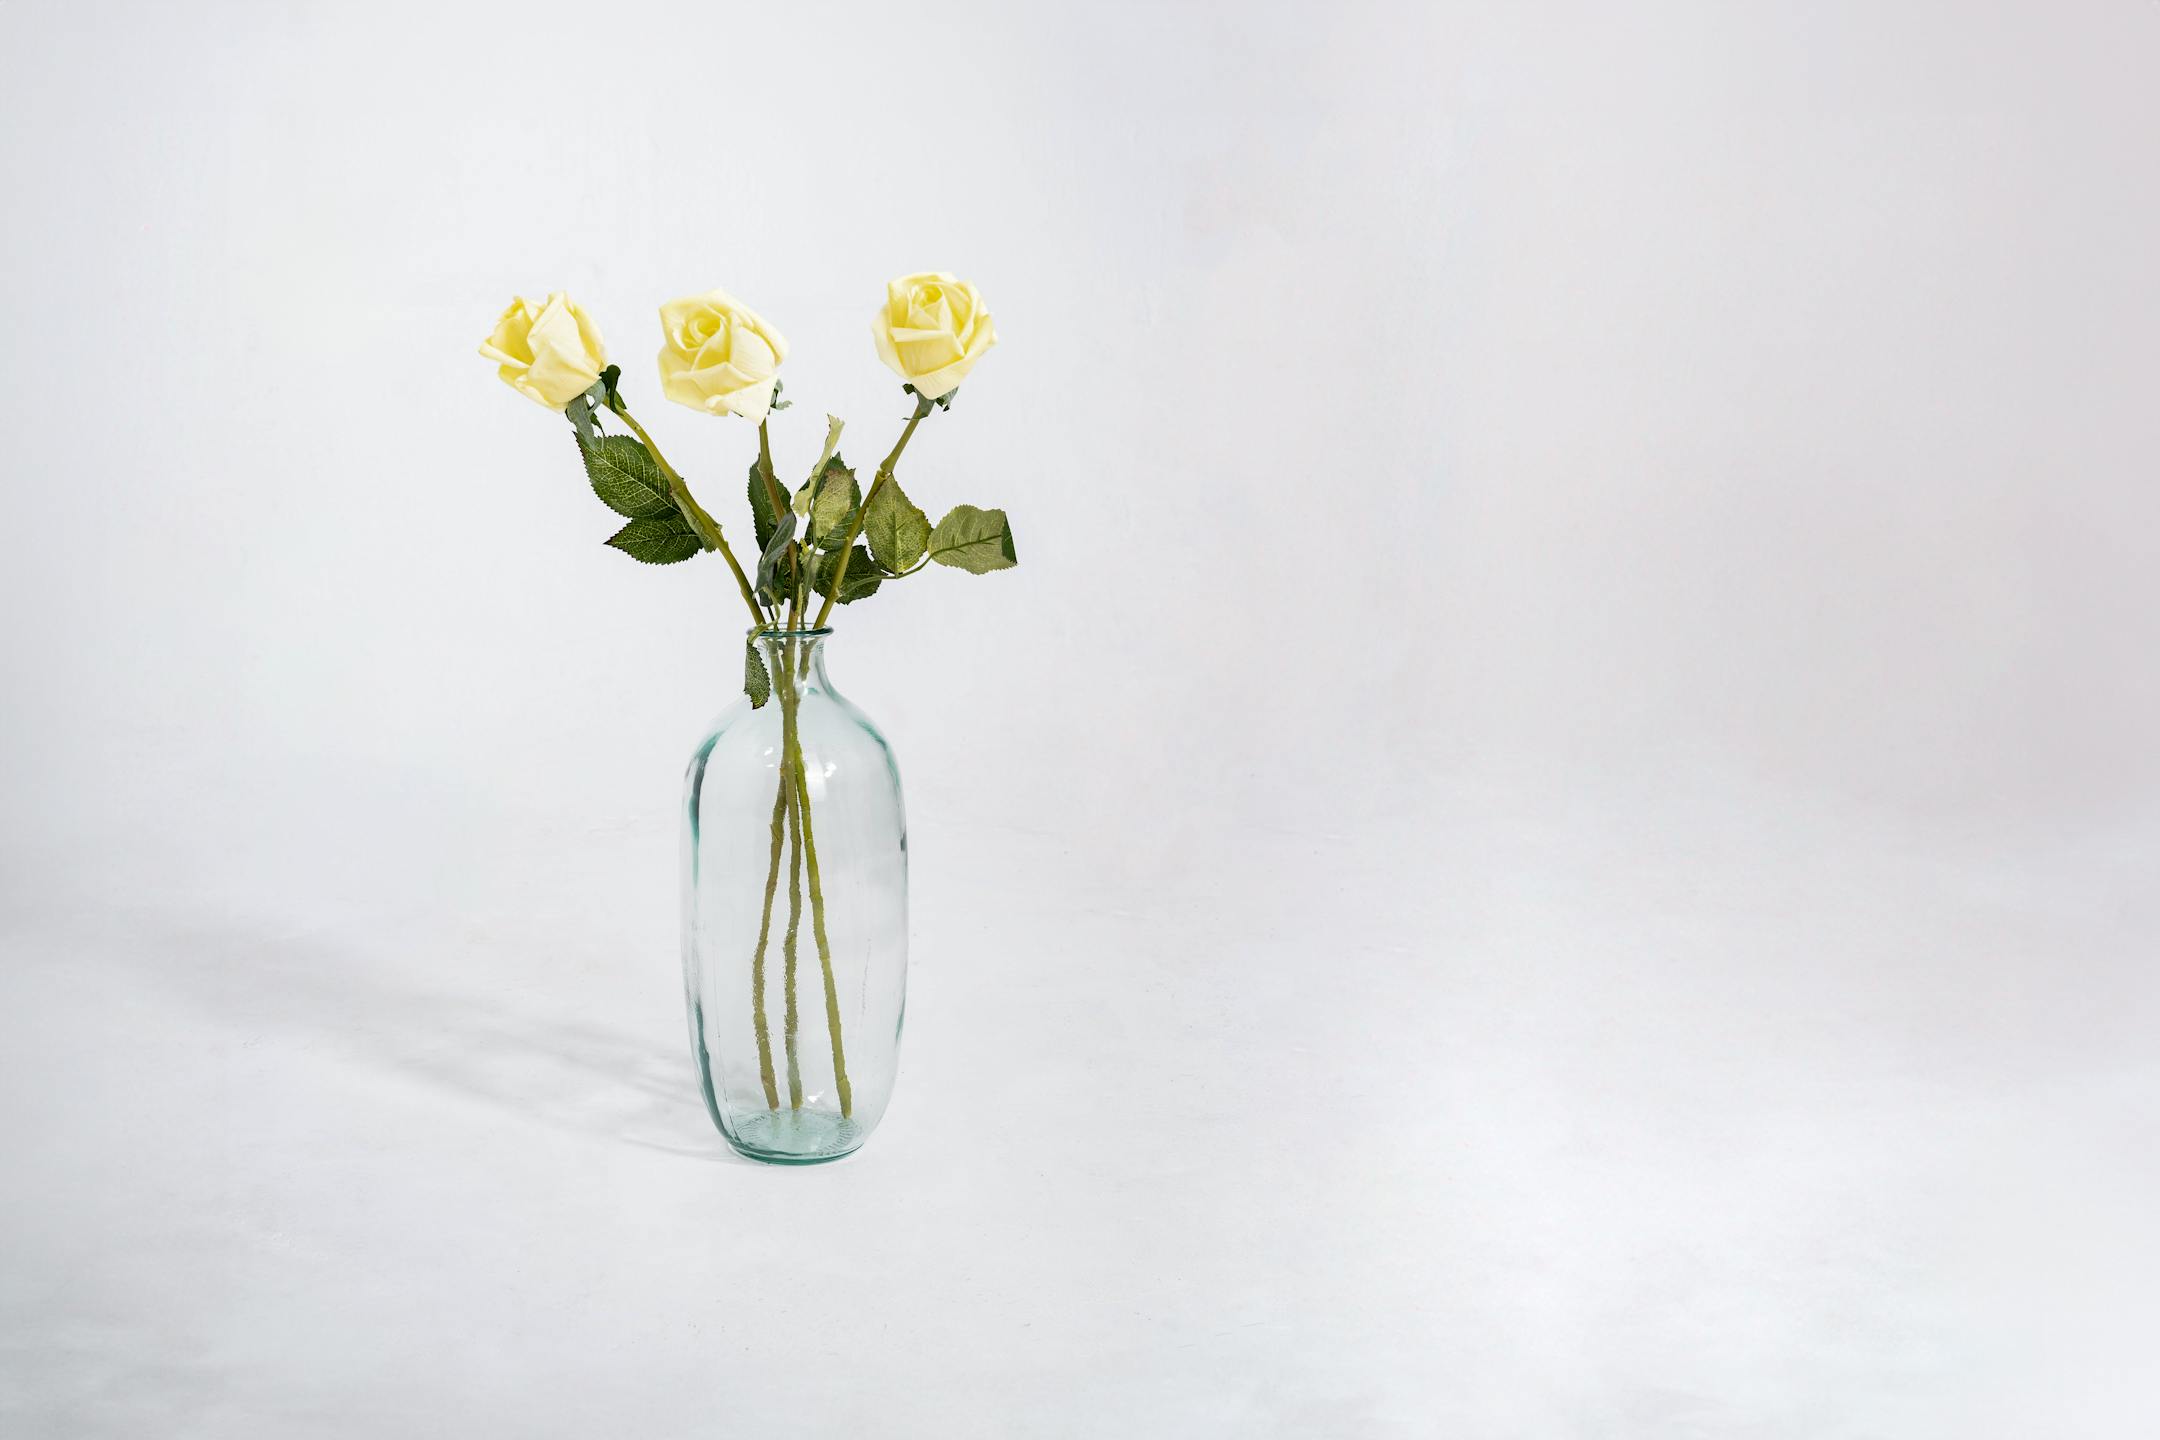 Three yellow artificial rose bud stems in glass vase